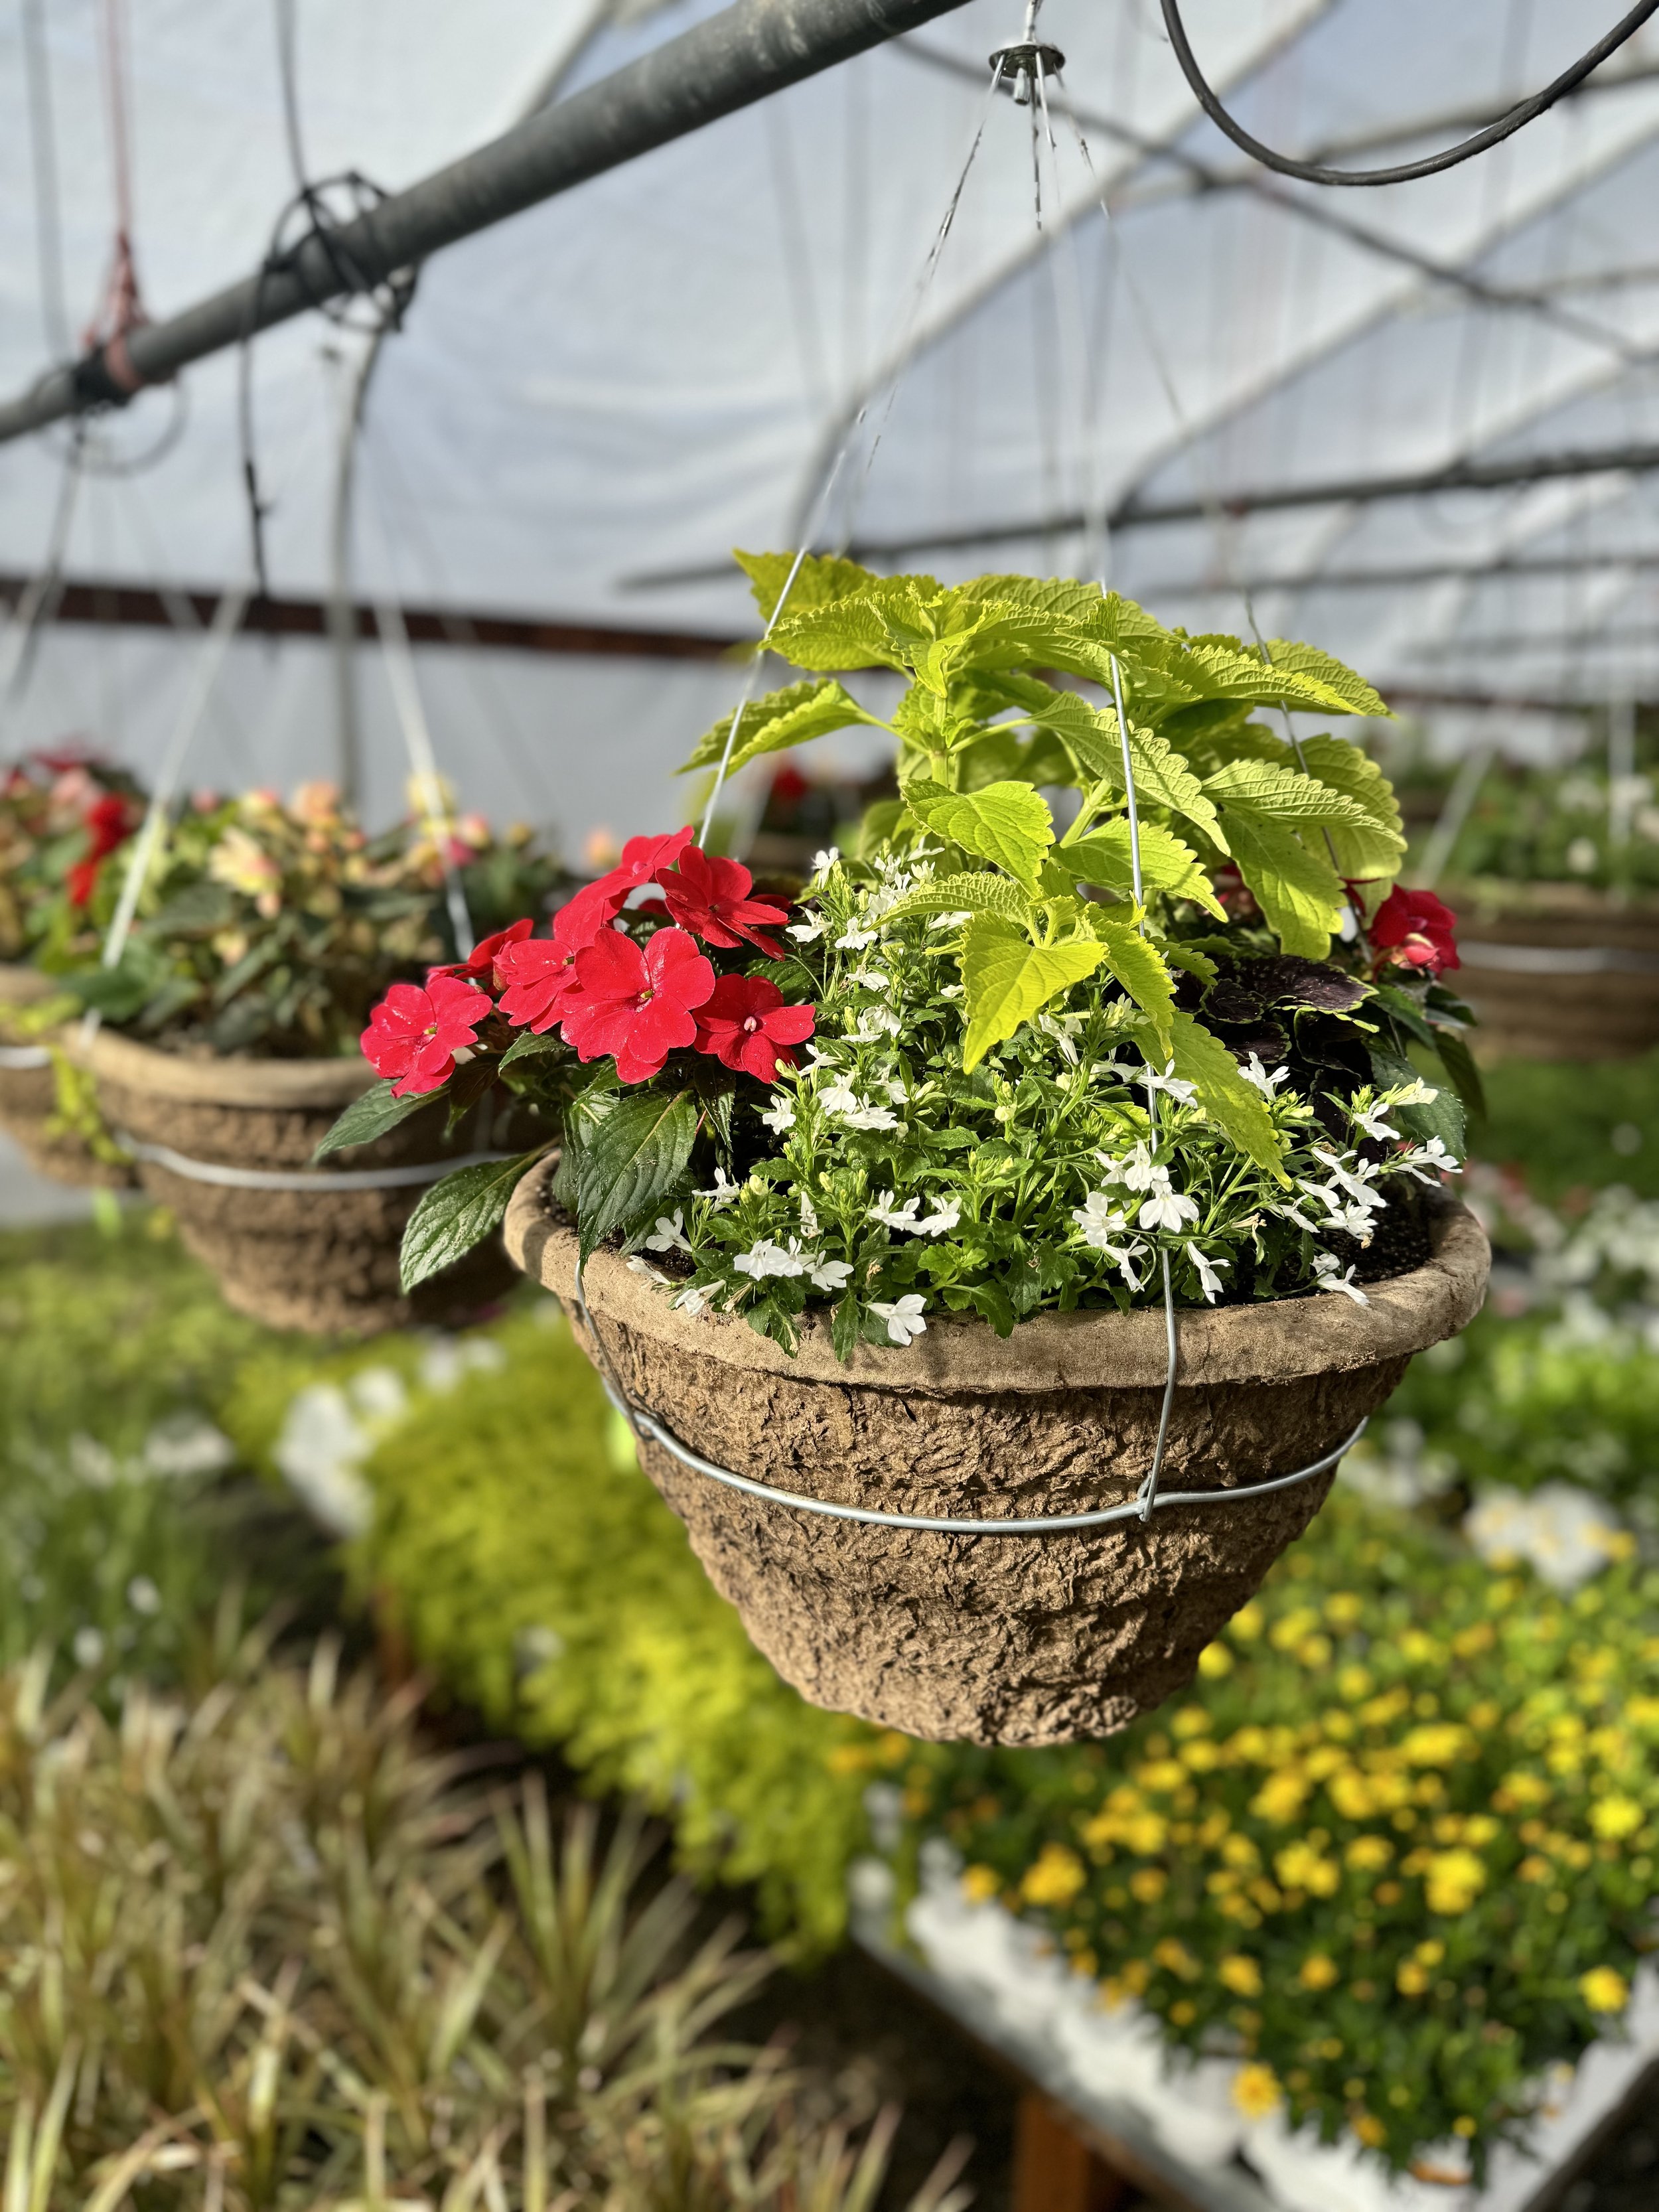             ELEVATE YOUR OUTDOORS   HANGING FLOWER BASKETS NOW AVAILABLE! 